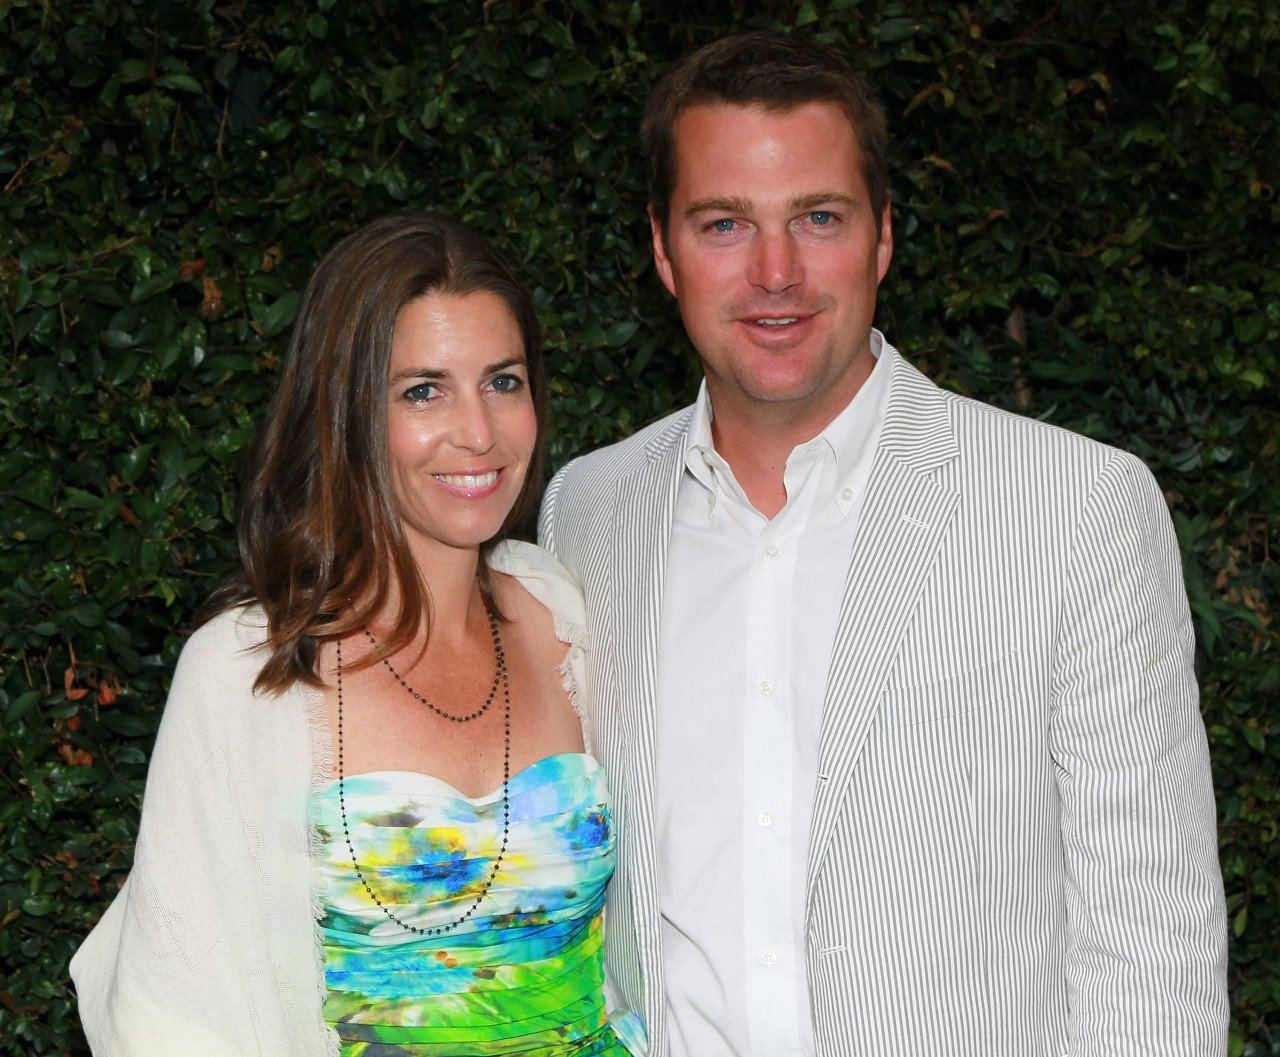 Caroline Fentress and Chris O'Donnell | David Livingston/Getty Images